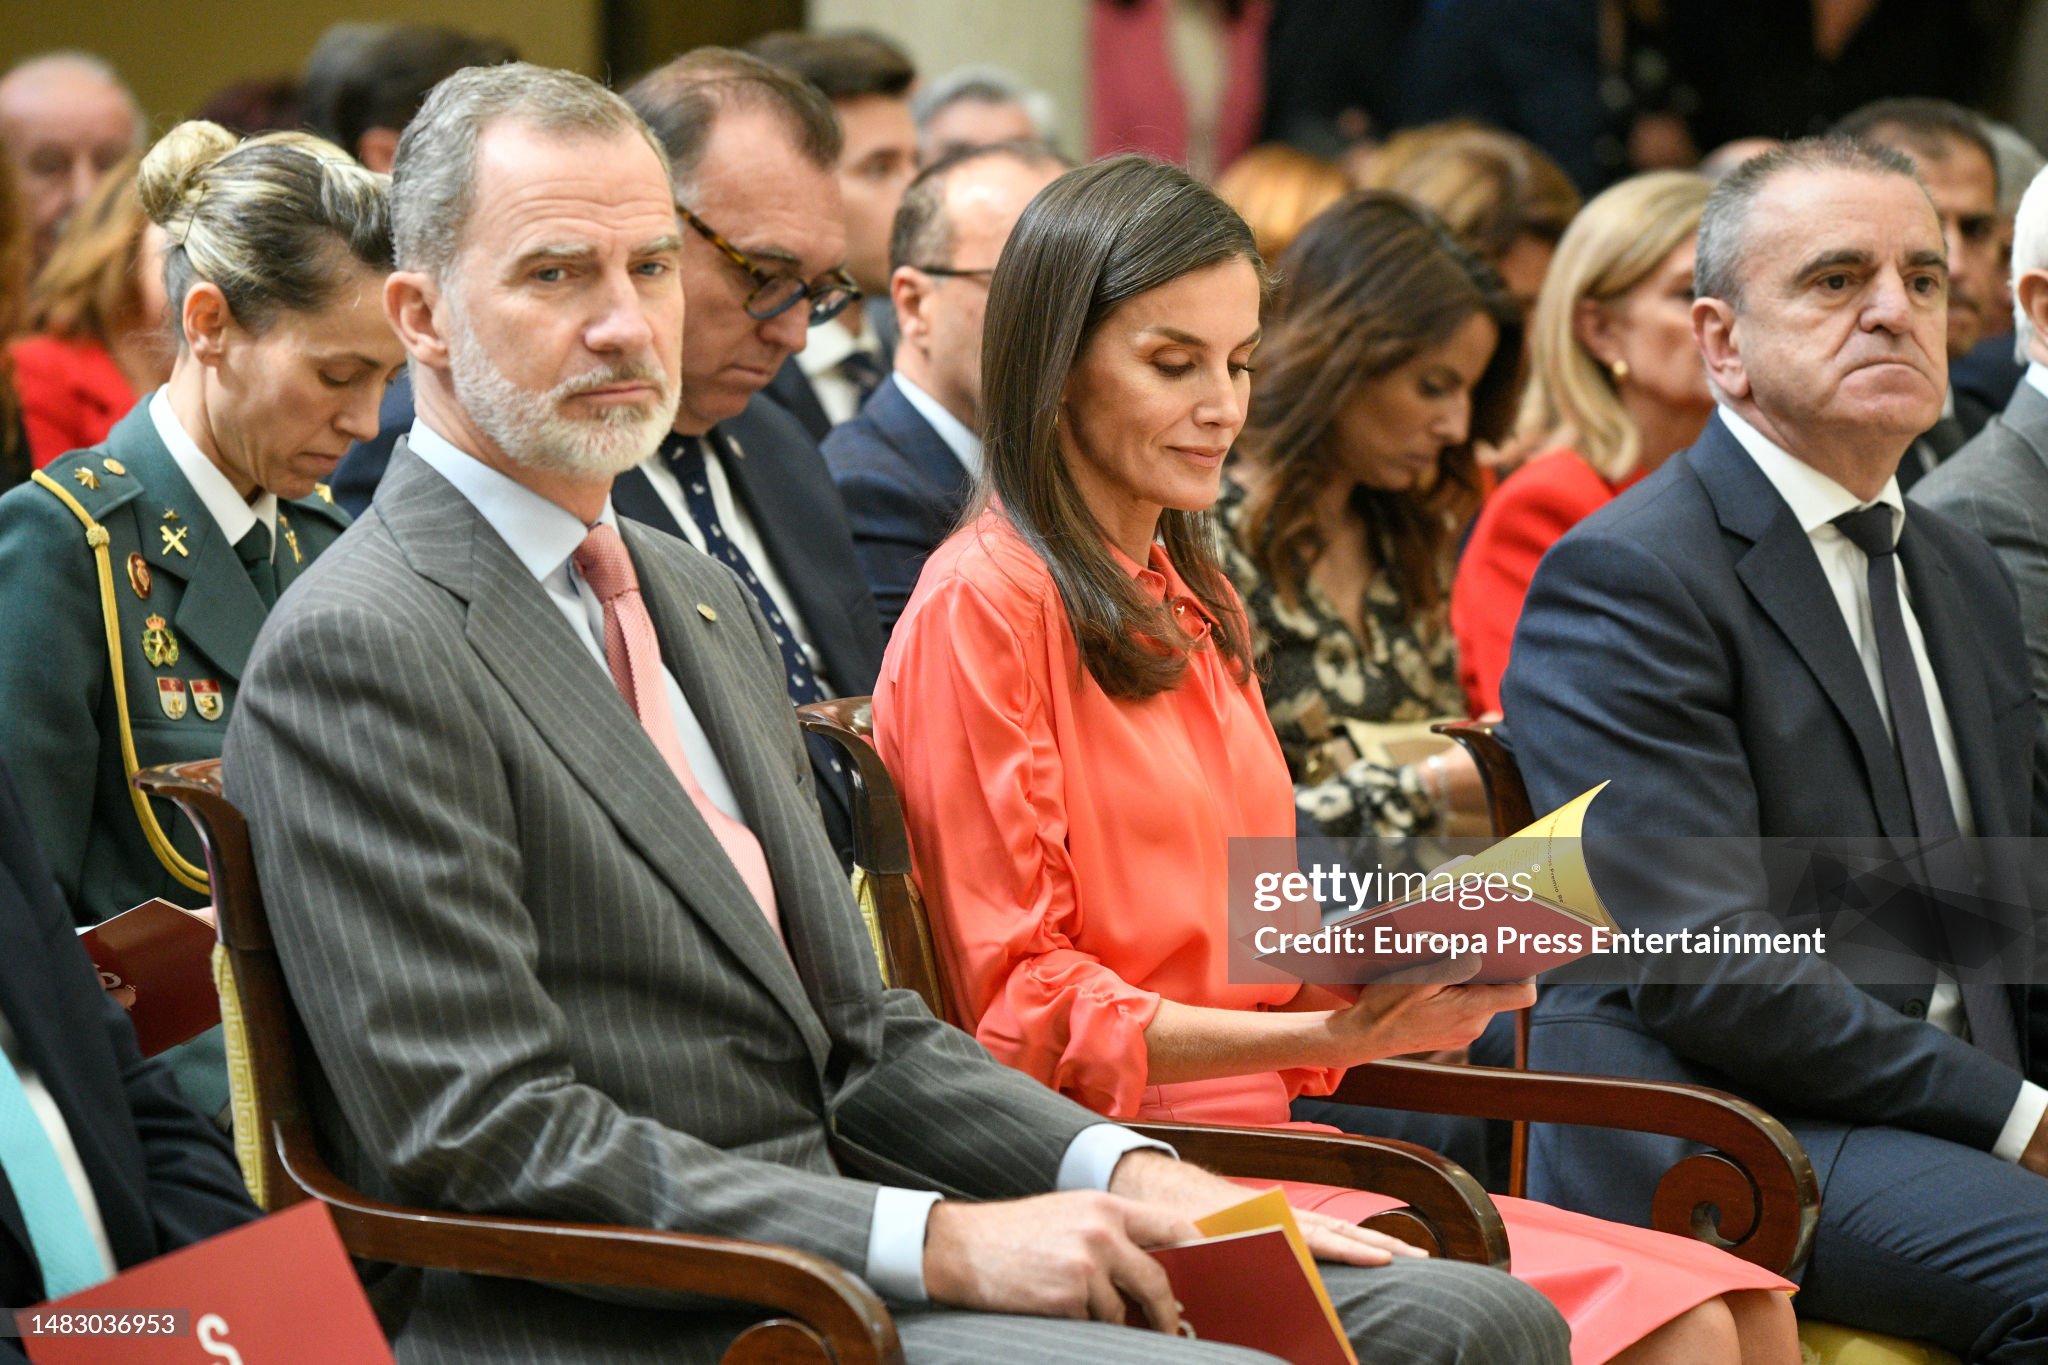 king-felipe-queen-letizia-and-the-president-of-the-superior-sports-council-jose-manuel-franco.jpg